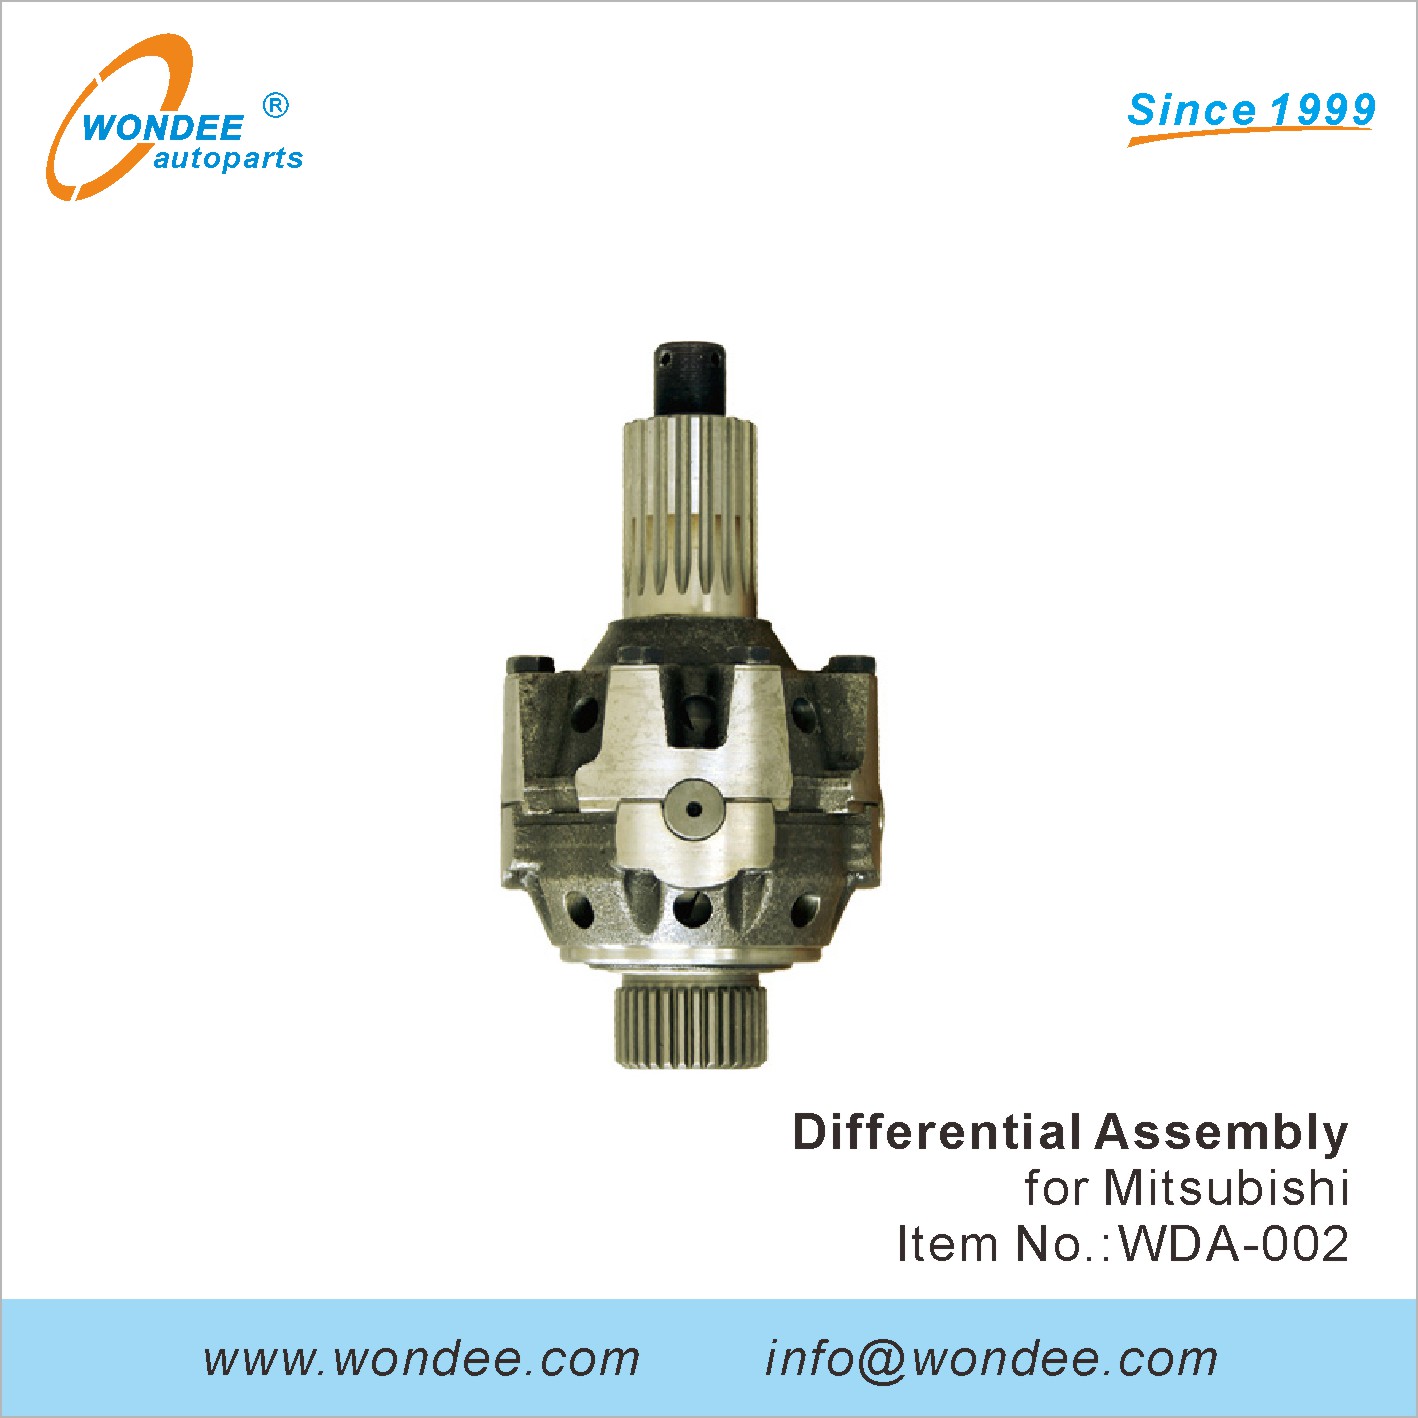 WONDEE differential assembly (2)